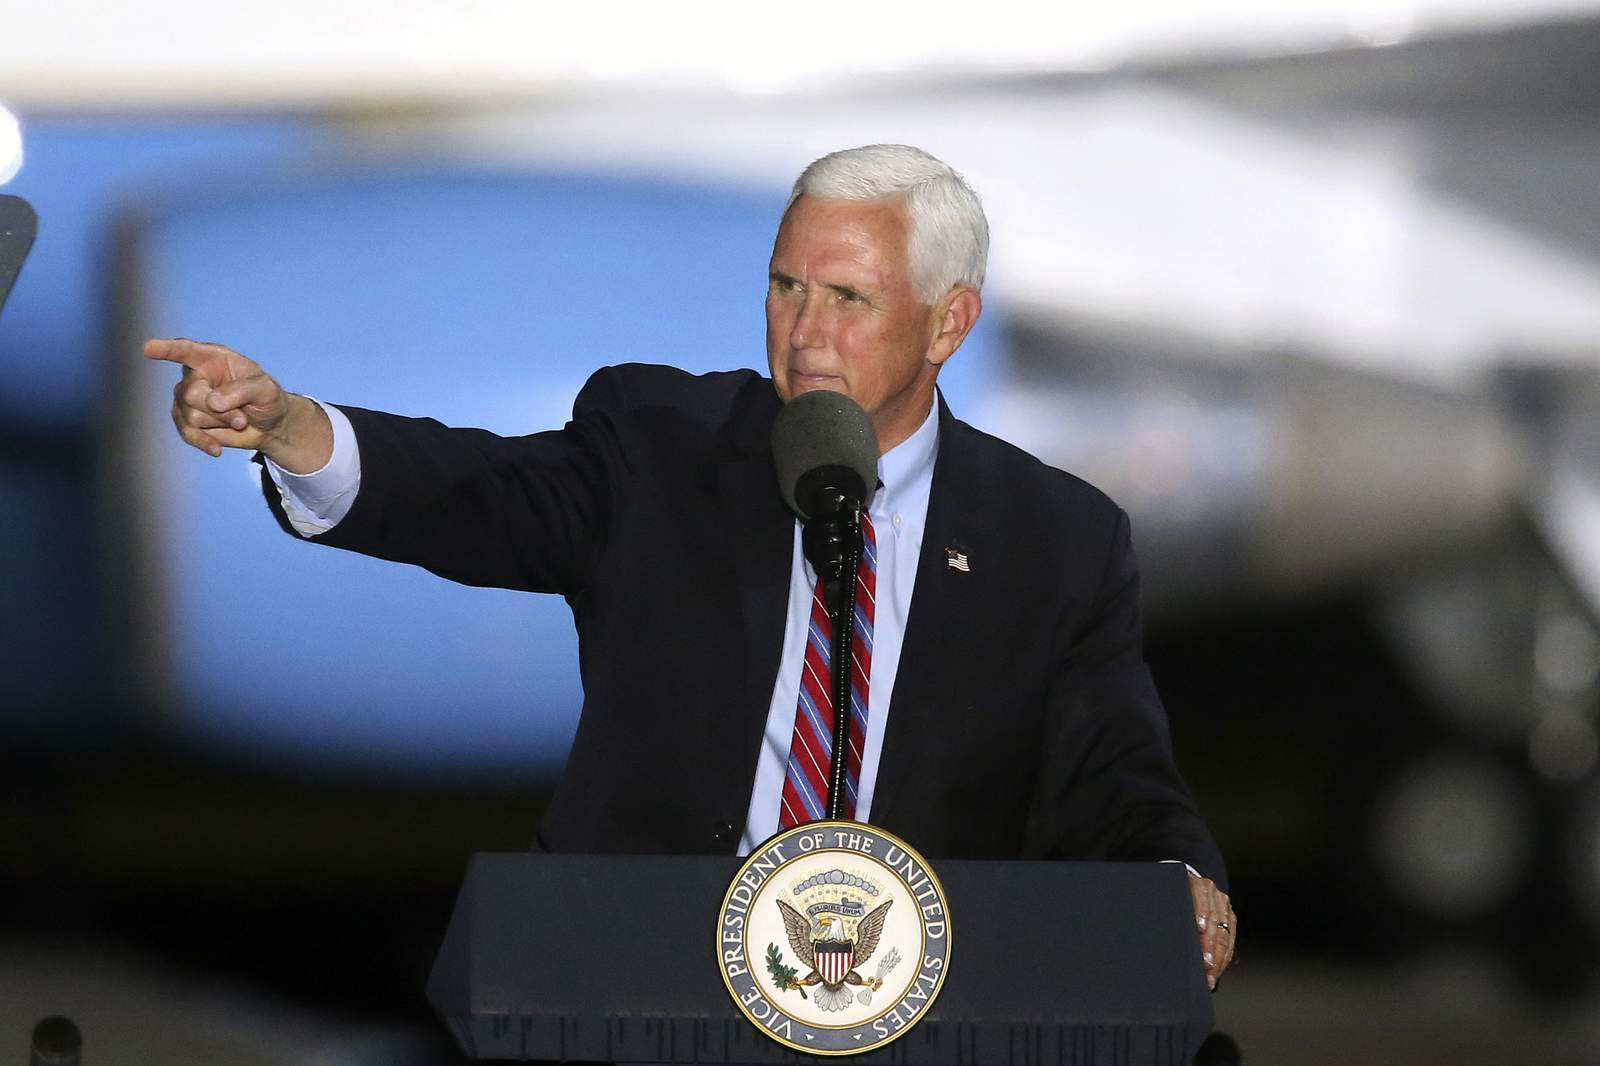 Vice President Mike Pence to hold ‘Make American Great Again’ rally Wednesday in Flint